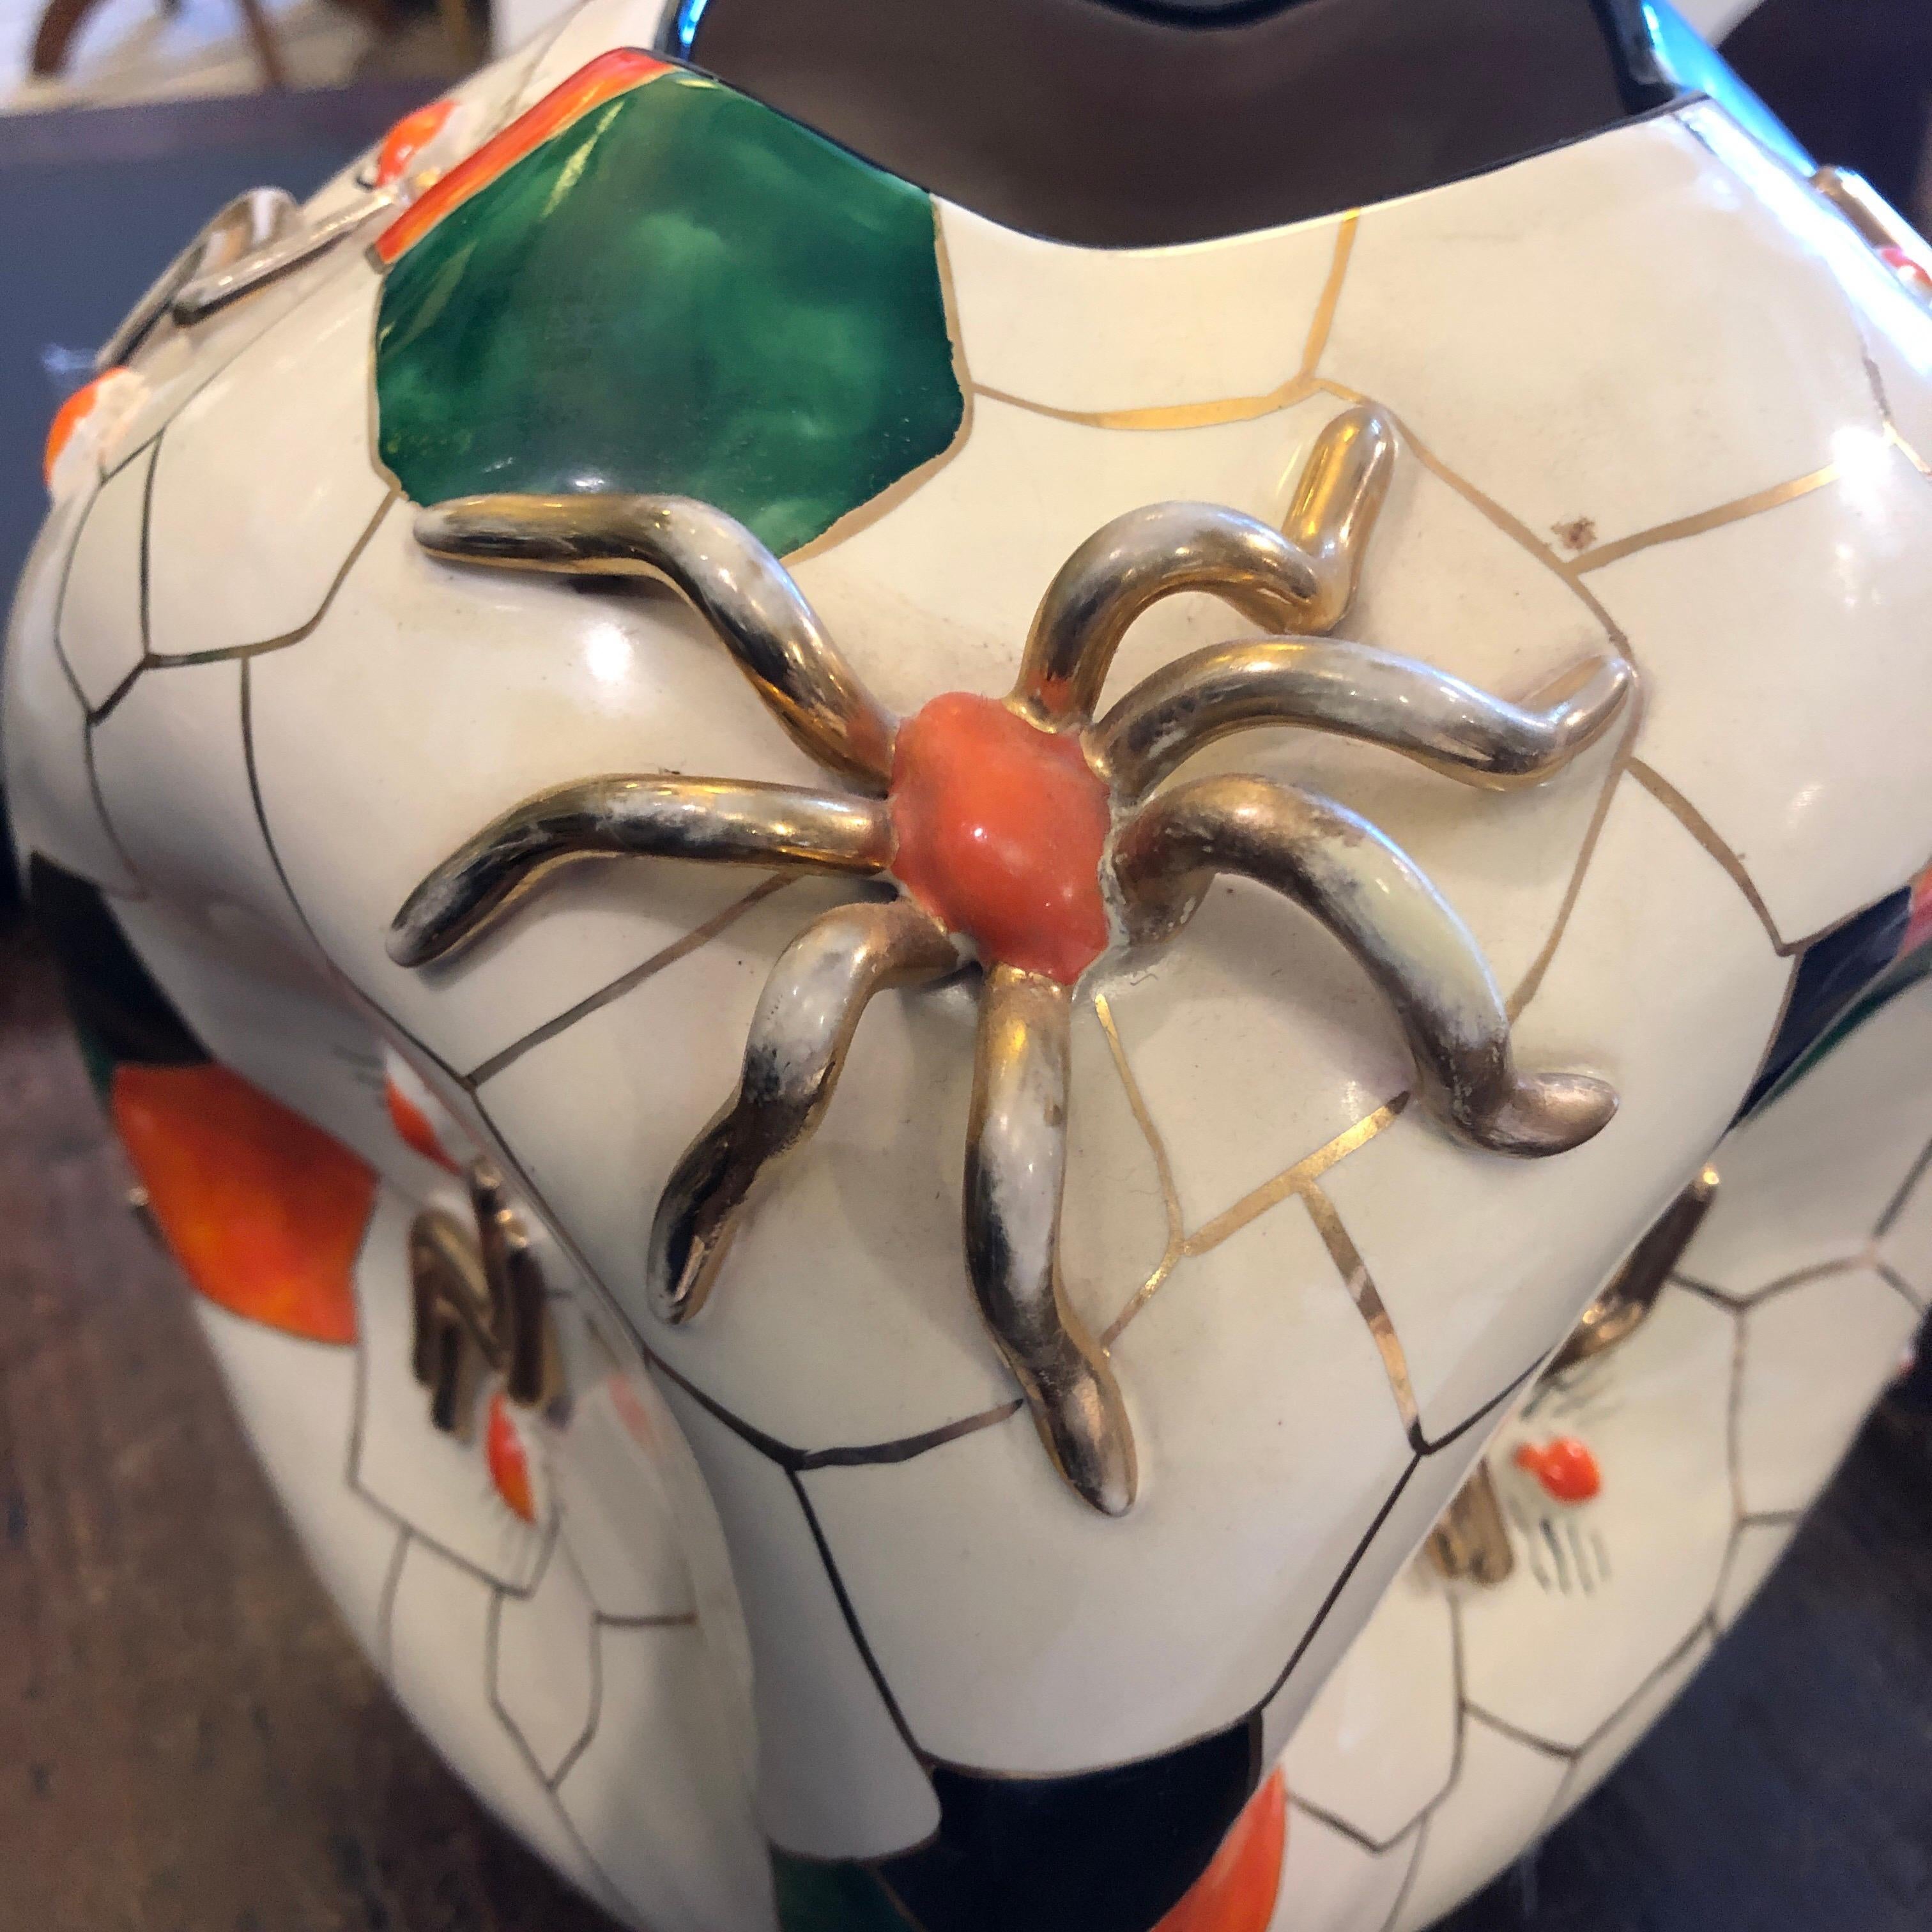 Pucci Iconic Cubic Spider Ceramic Vase Made in Italy in 1952 2